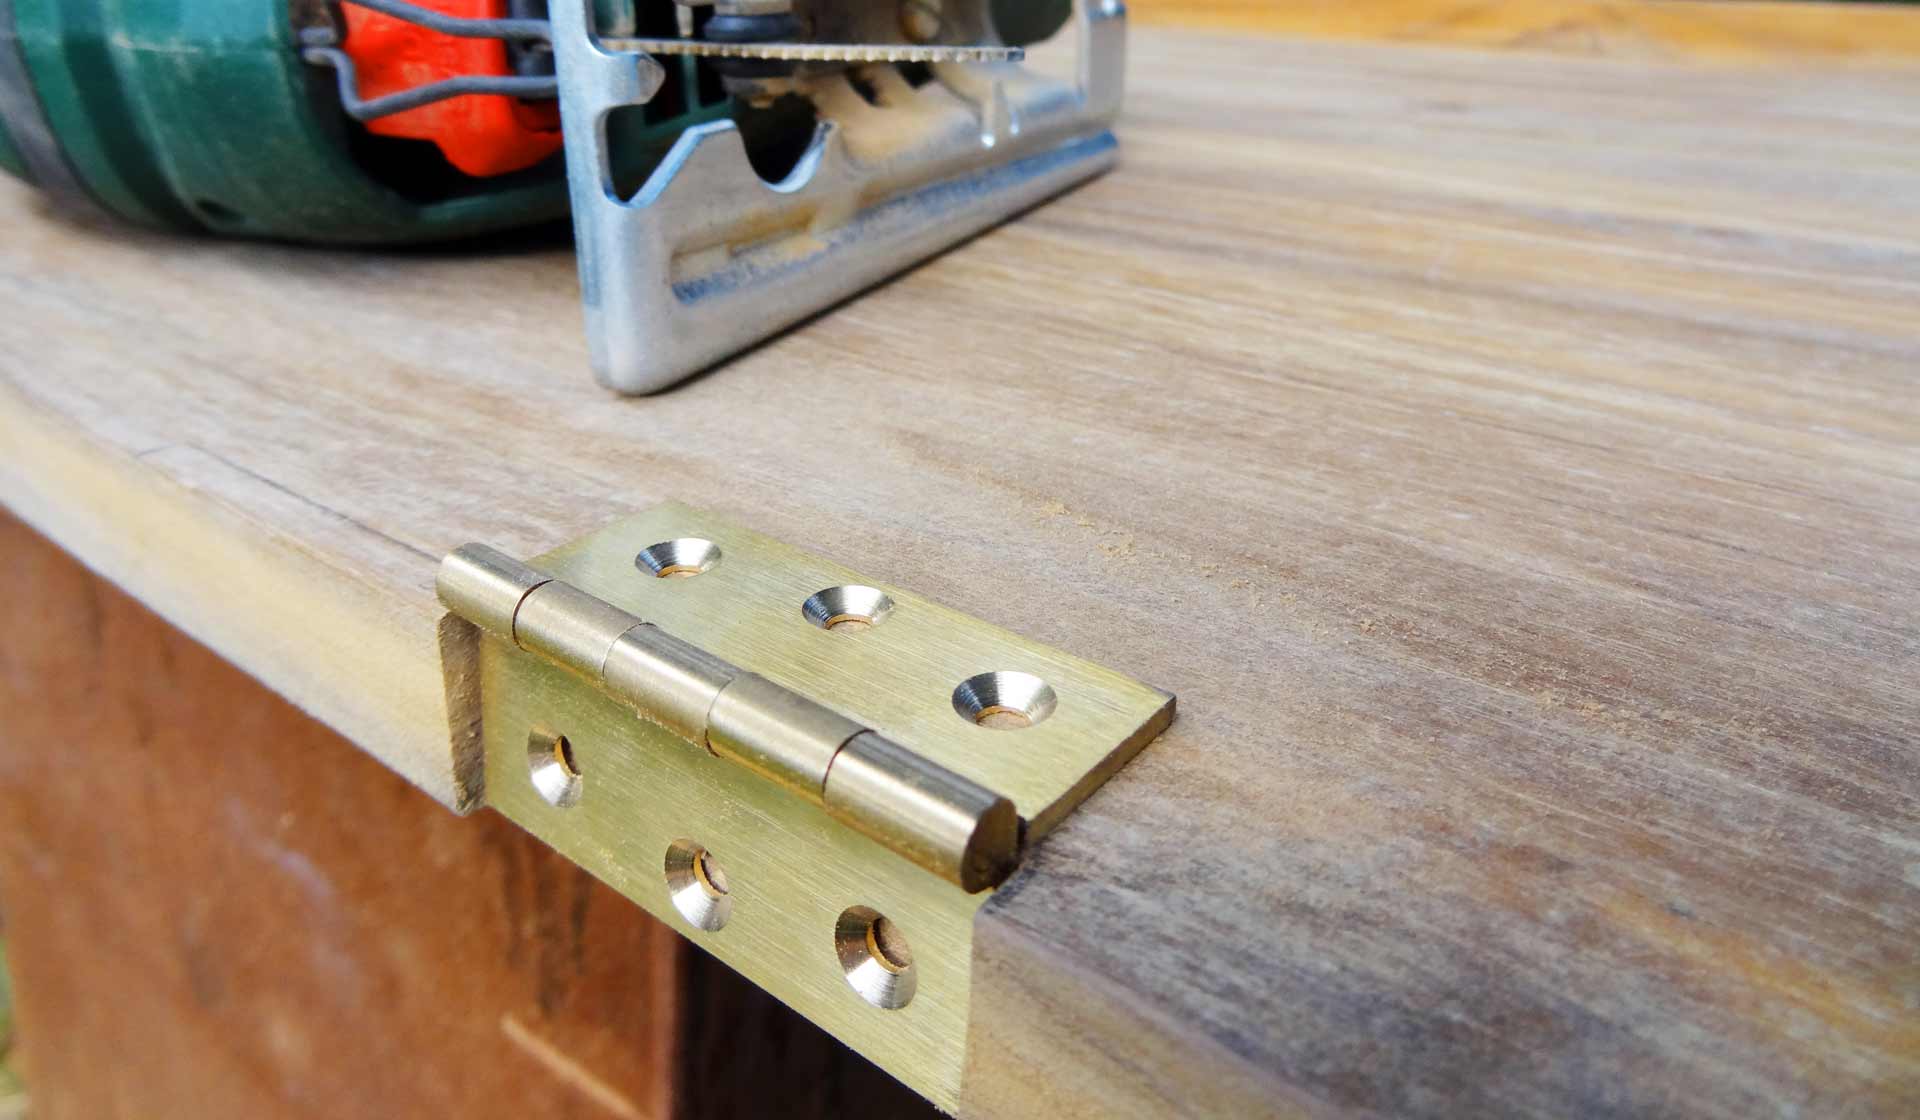 Slots for the hinges